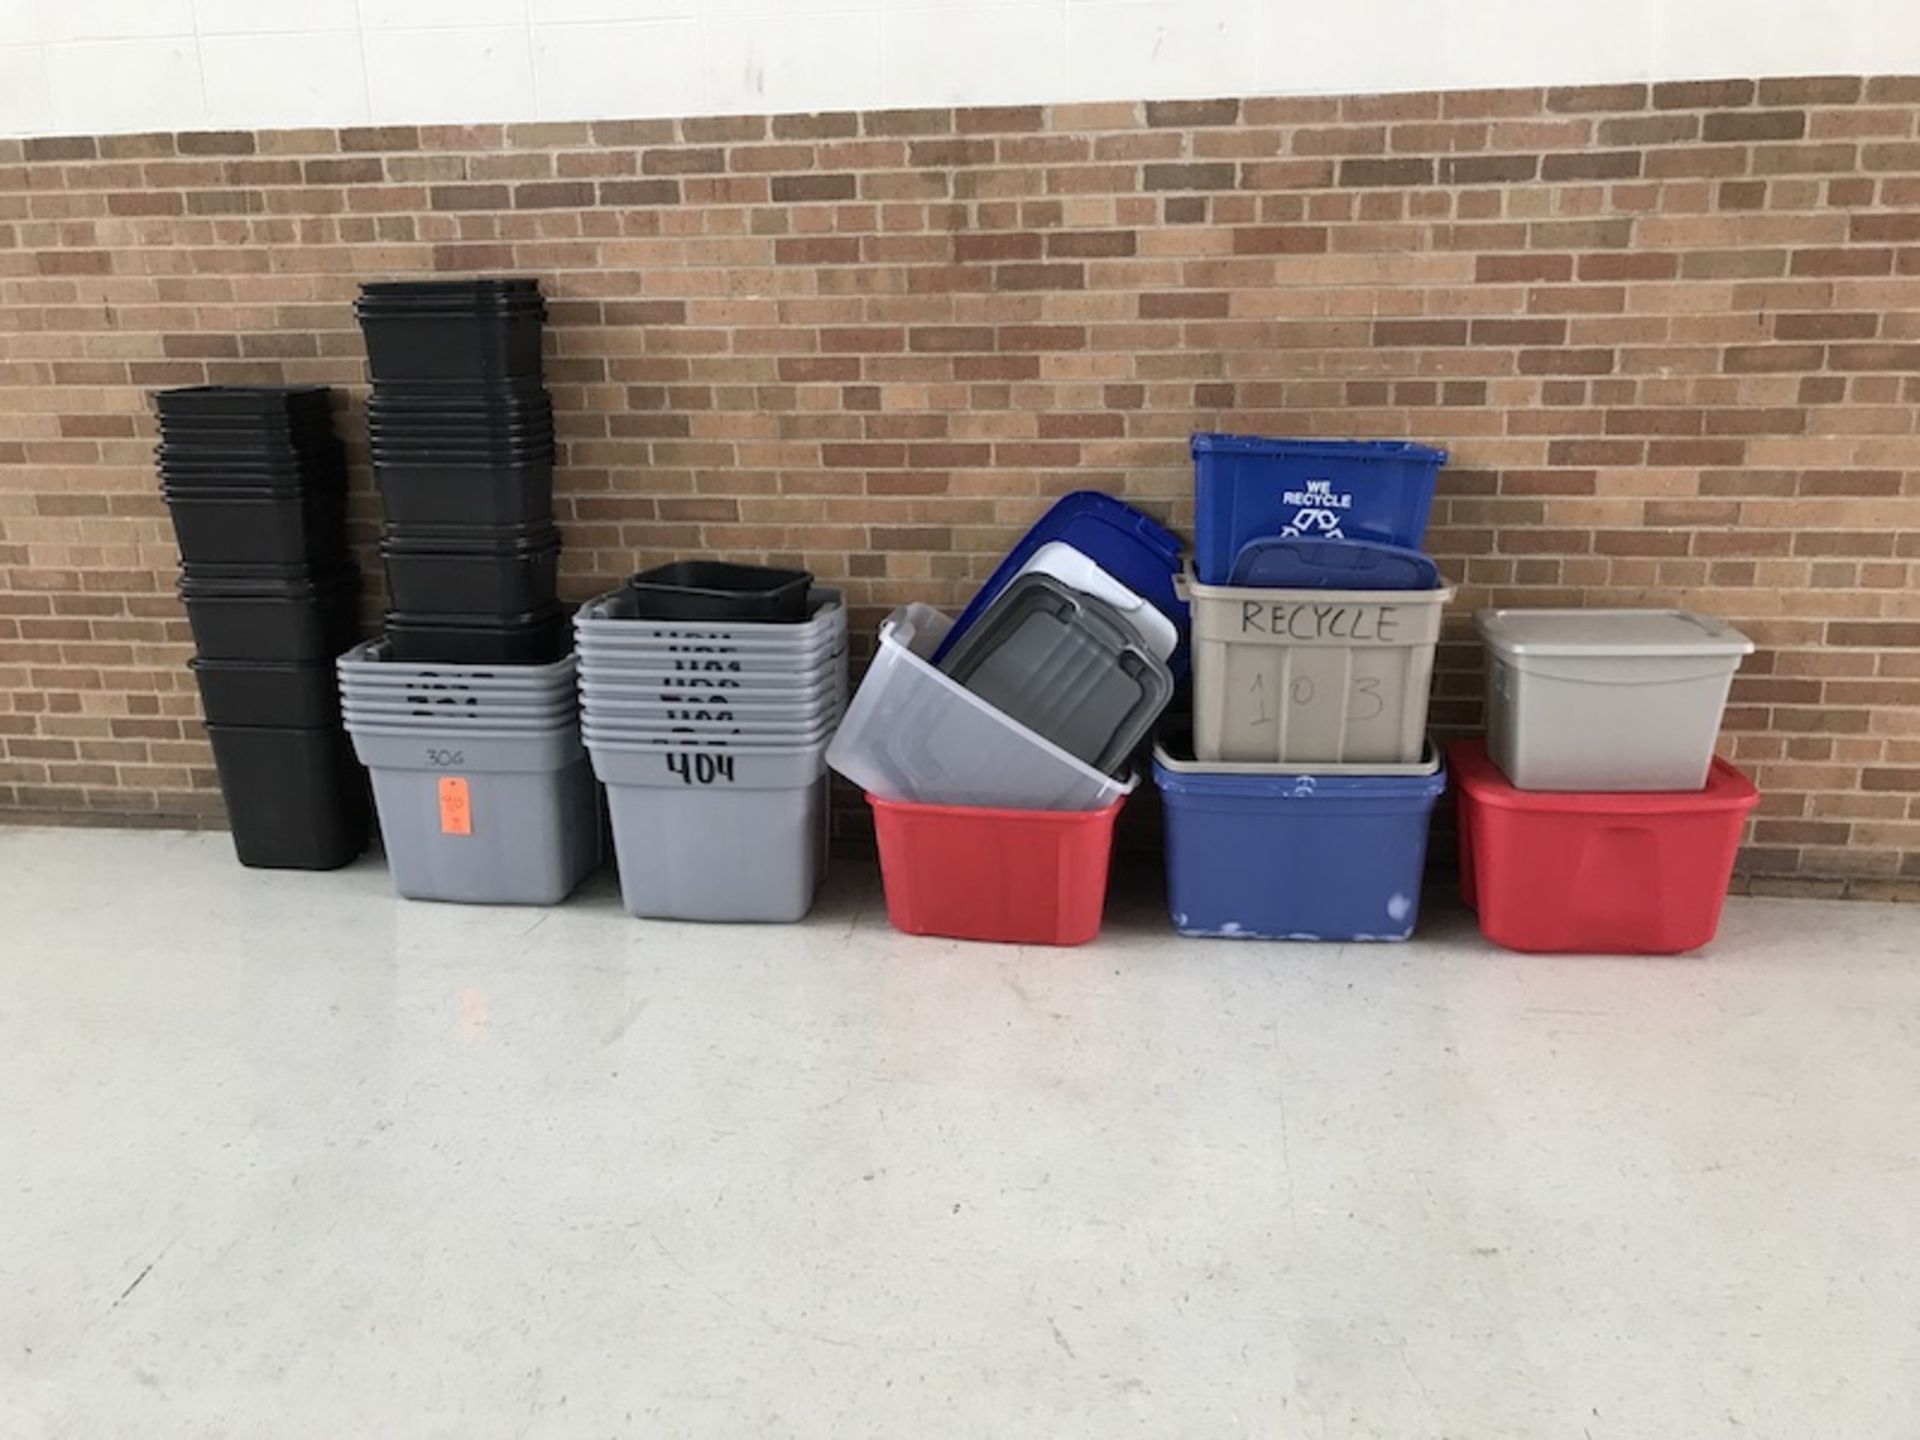 Lot of Plastic Trash Cans and Misc. Storage Bins (New Gym)